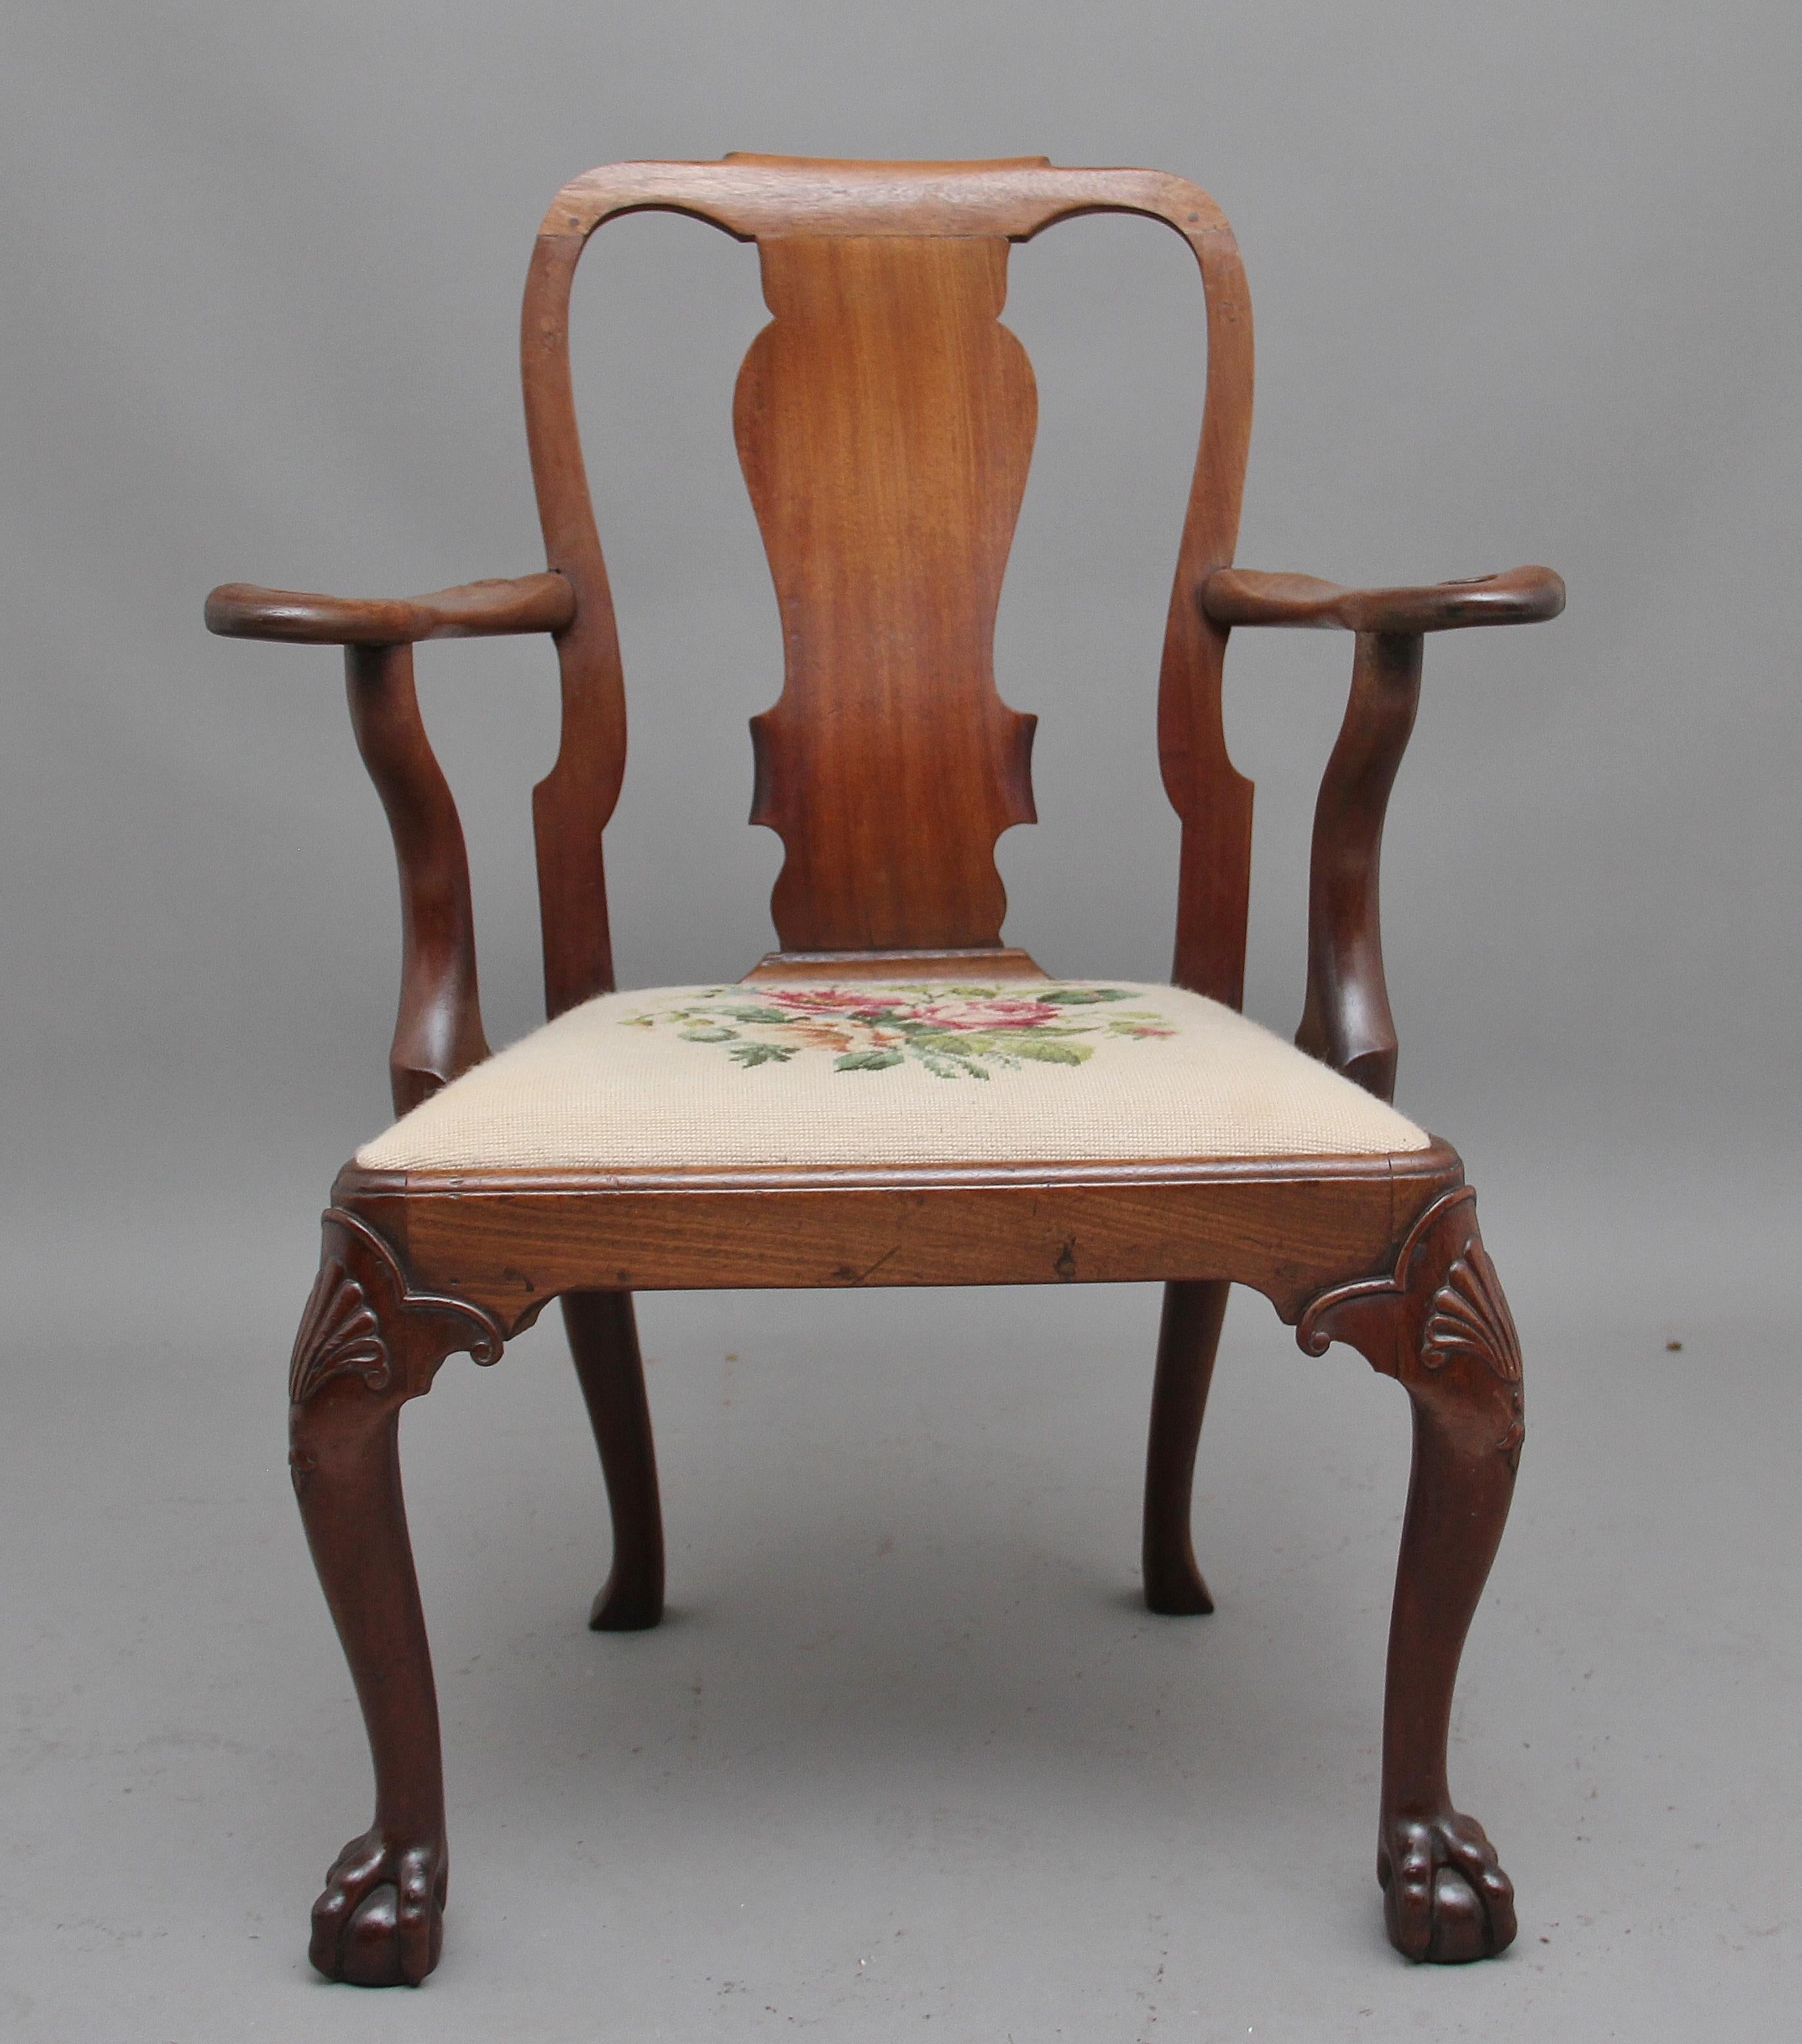 18th century walnut open armchair in the Queen Anne style, having a shaped central splat flanked by curved uprights, the elegantly shaped arm supports incorporating swan heads, drop in upholstered seat with a needlework floral pattern, standing on